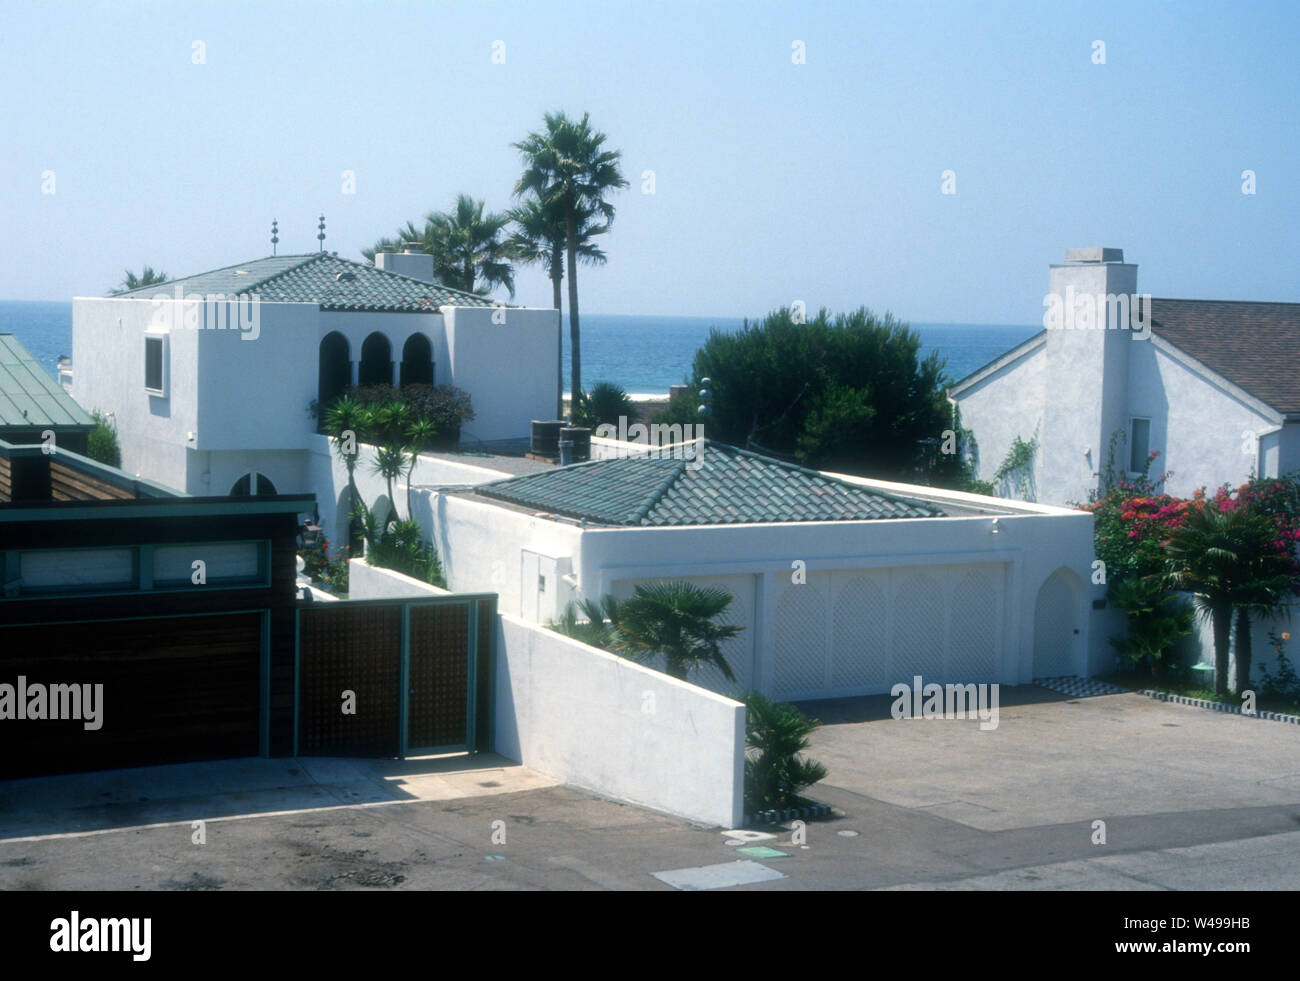 Malibu, California, USA 1st September 1994 A general view of atmosphere of Carroll O'Connor's Home on September 1, 1994 in Malibu, California, USA Photo by Barry King/Alamy Stock Photo Stock Photo